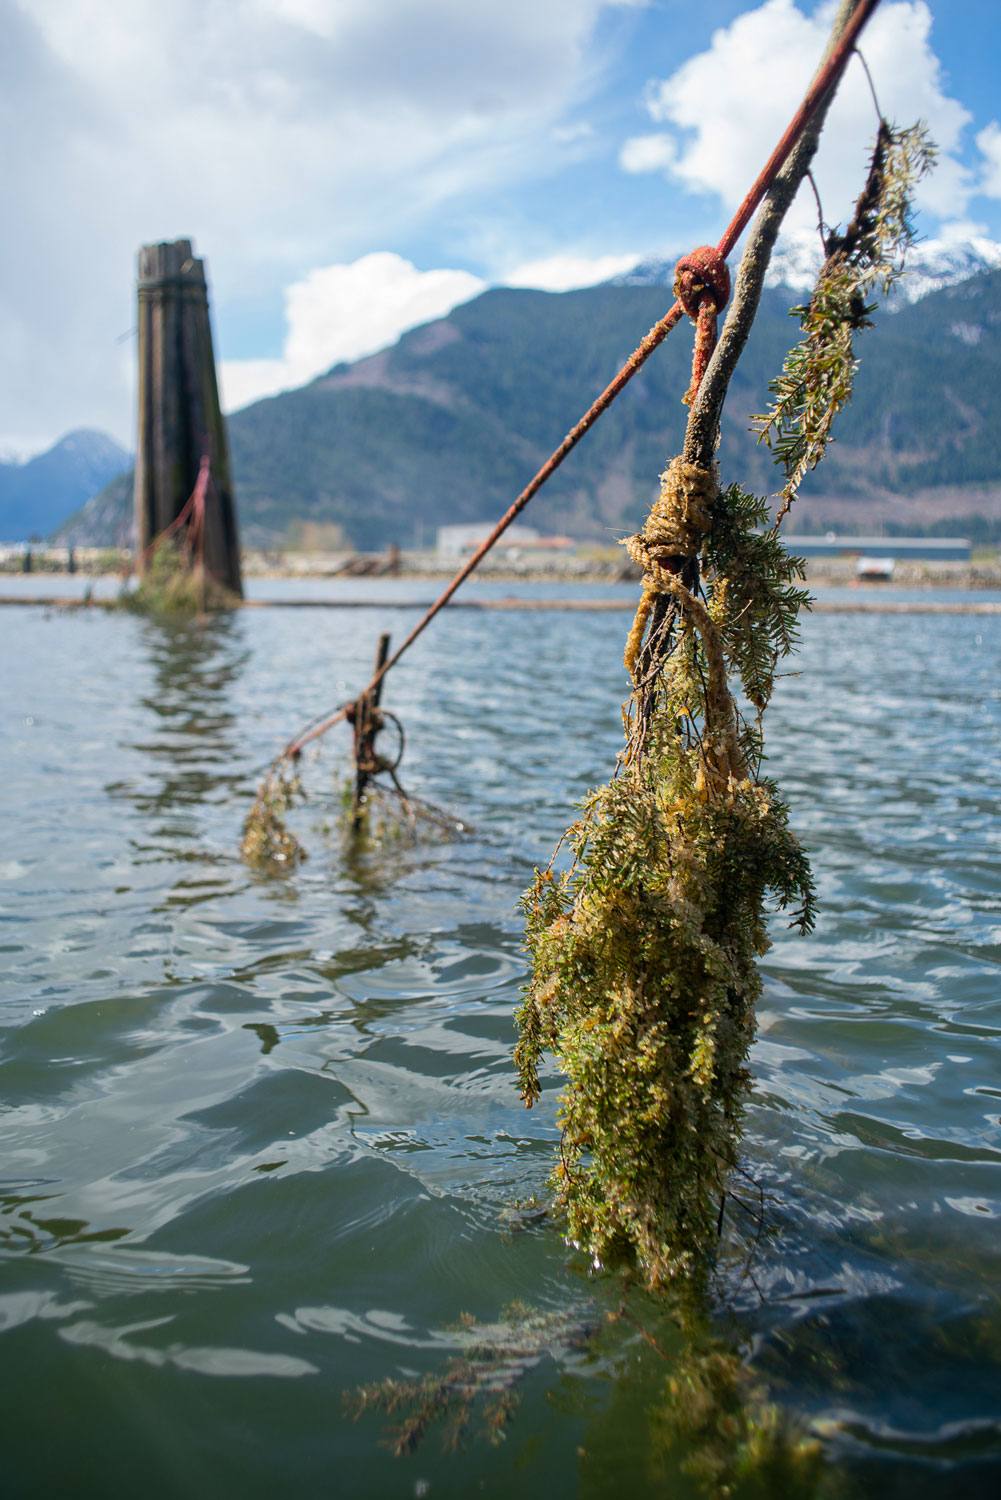 Hemlock boughs dip into the water of the Howe Sound. They are tied onto a string.